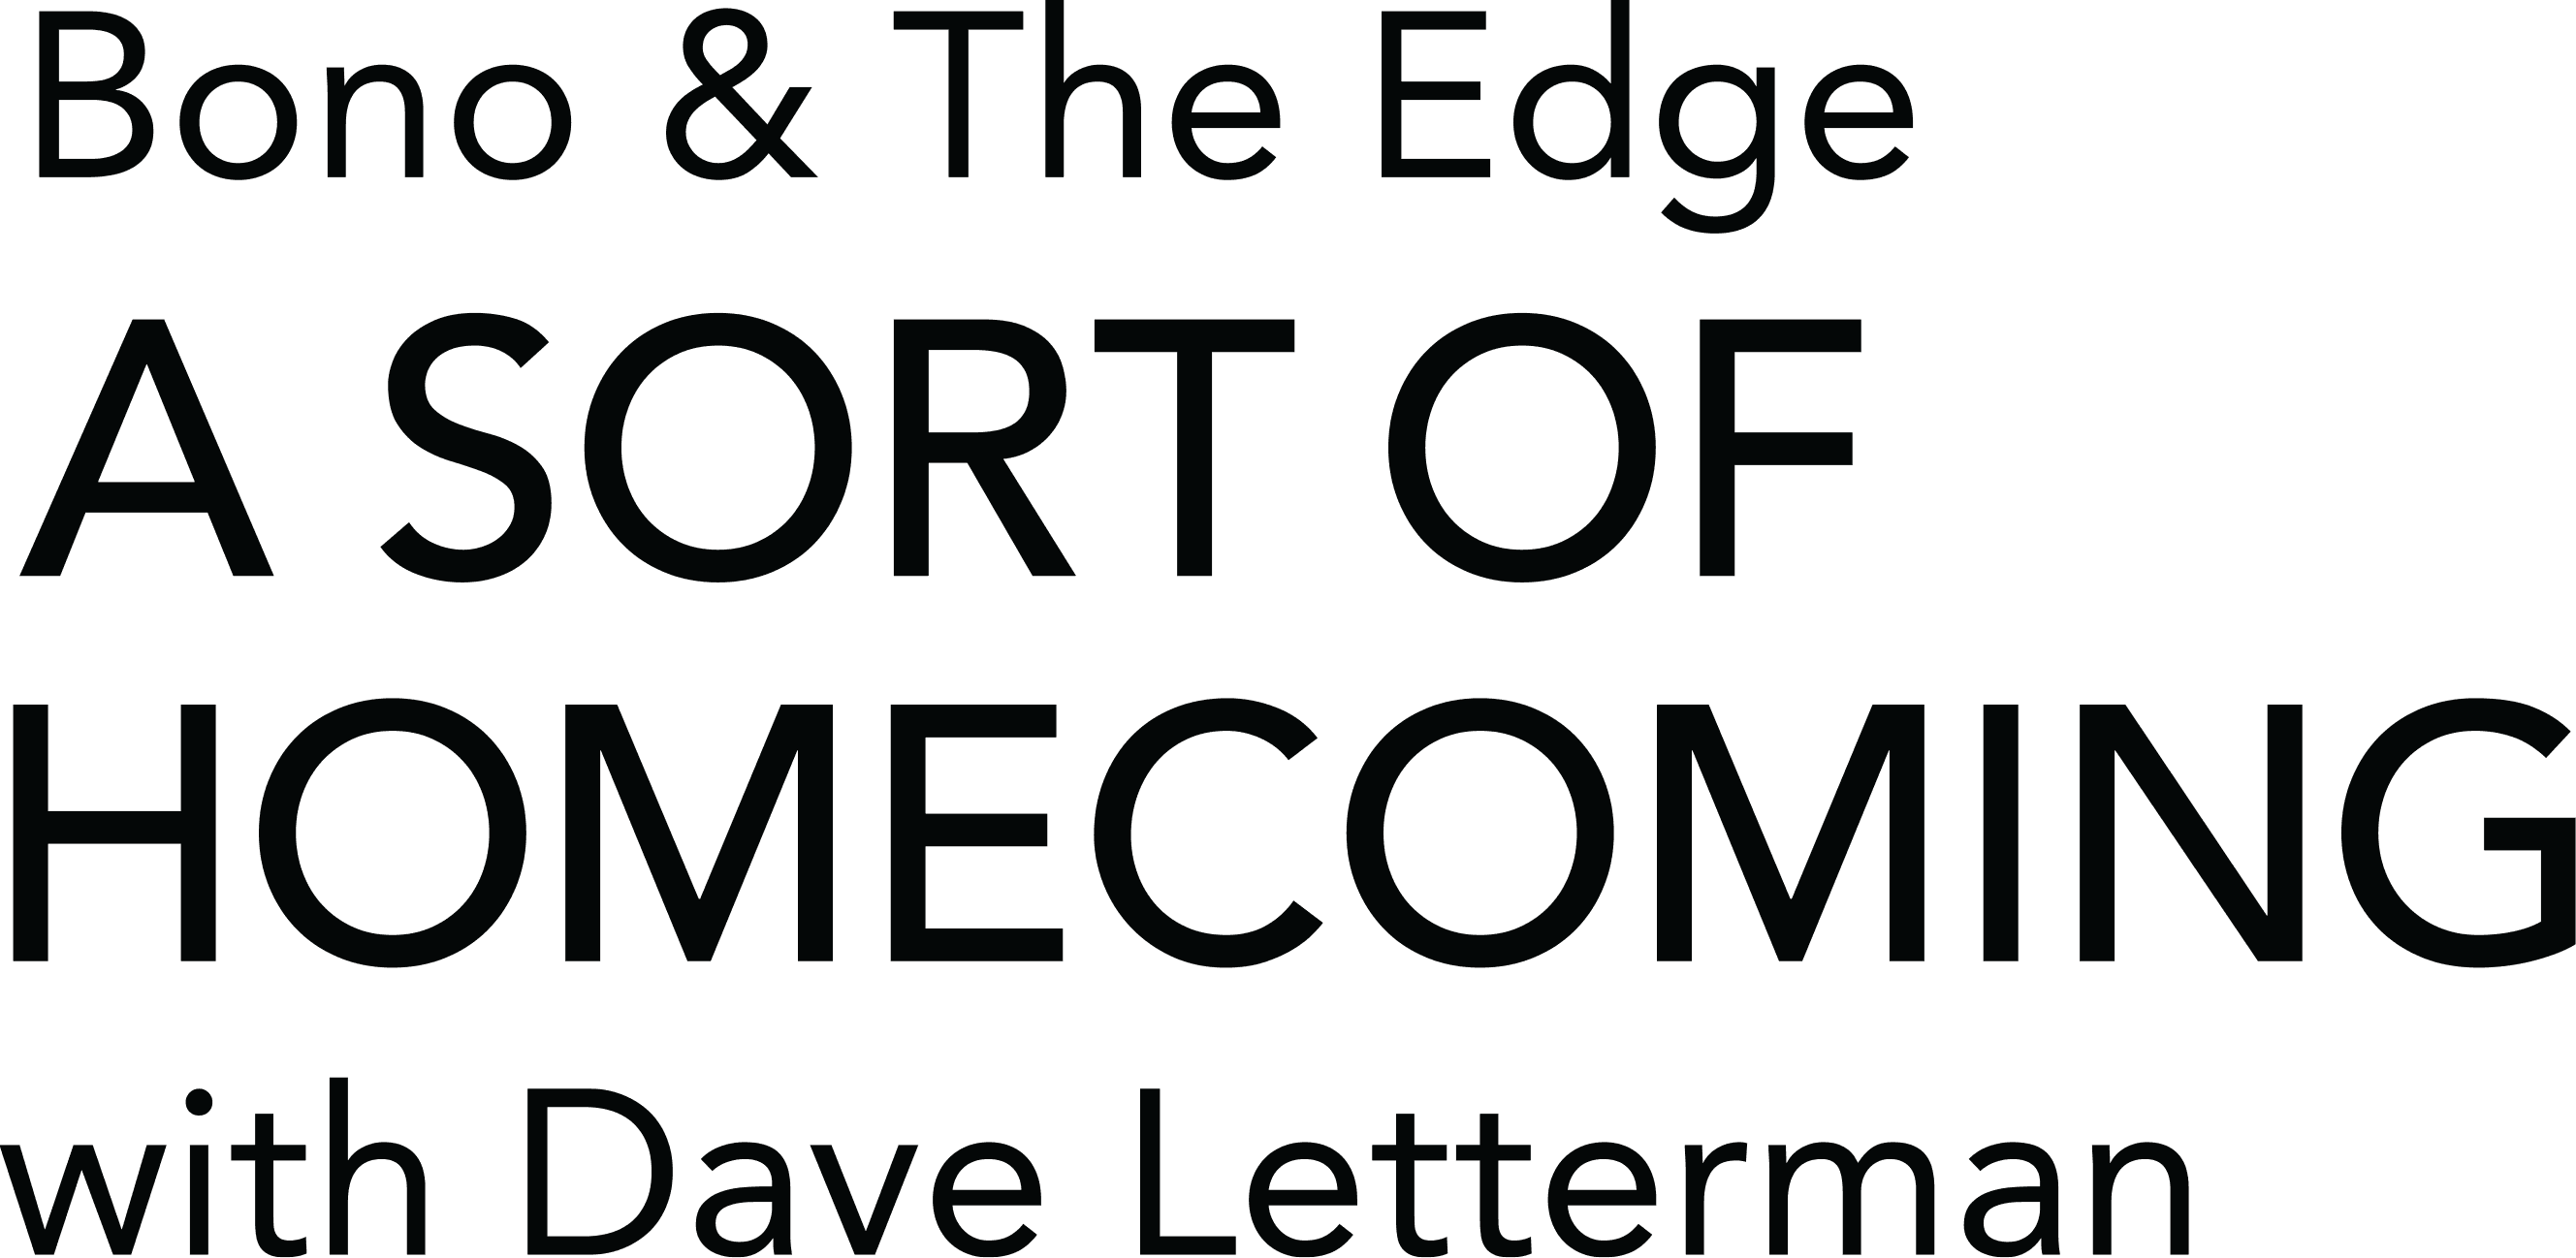 Bono & The Edge: A Sort of Homecoming with Dave Letterman logo